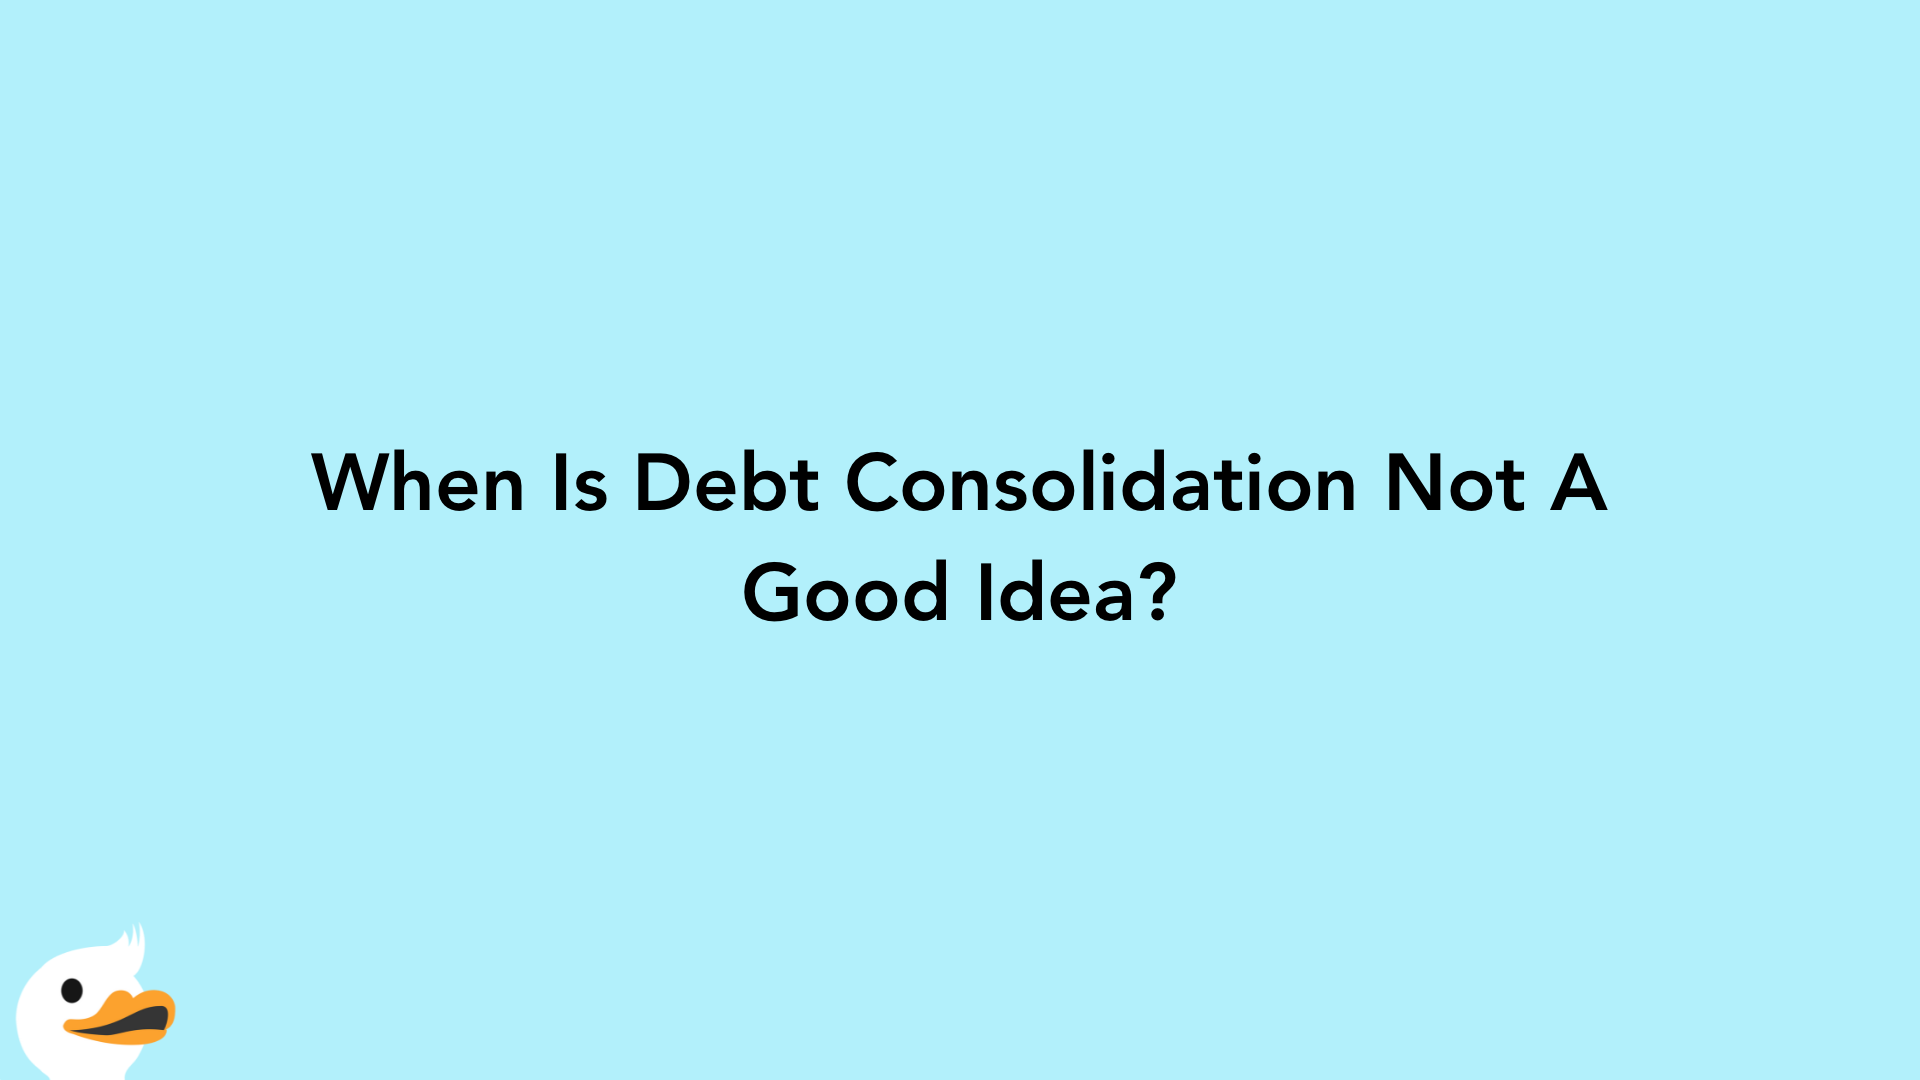 When Is Debt Consolidation Not A Good Idea?